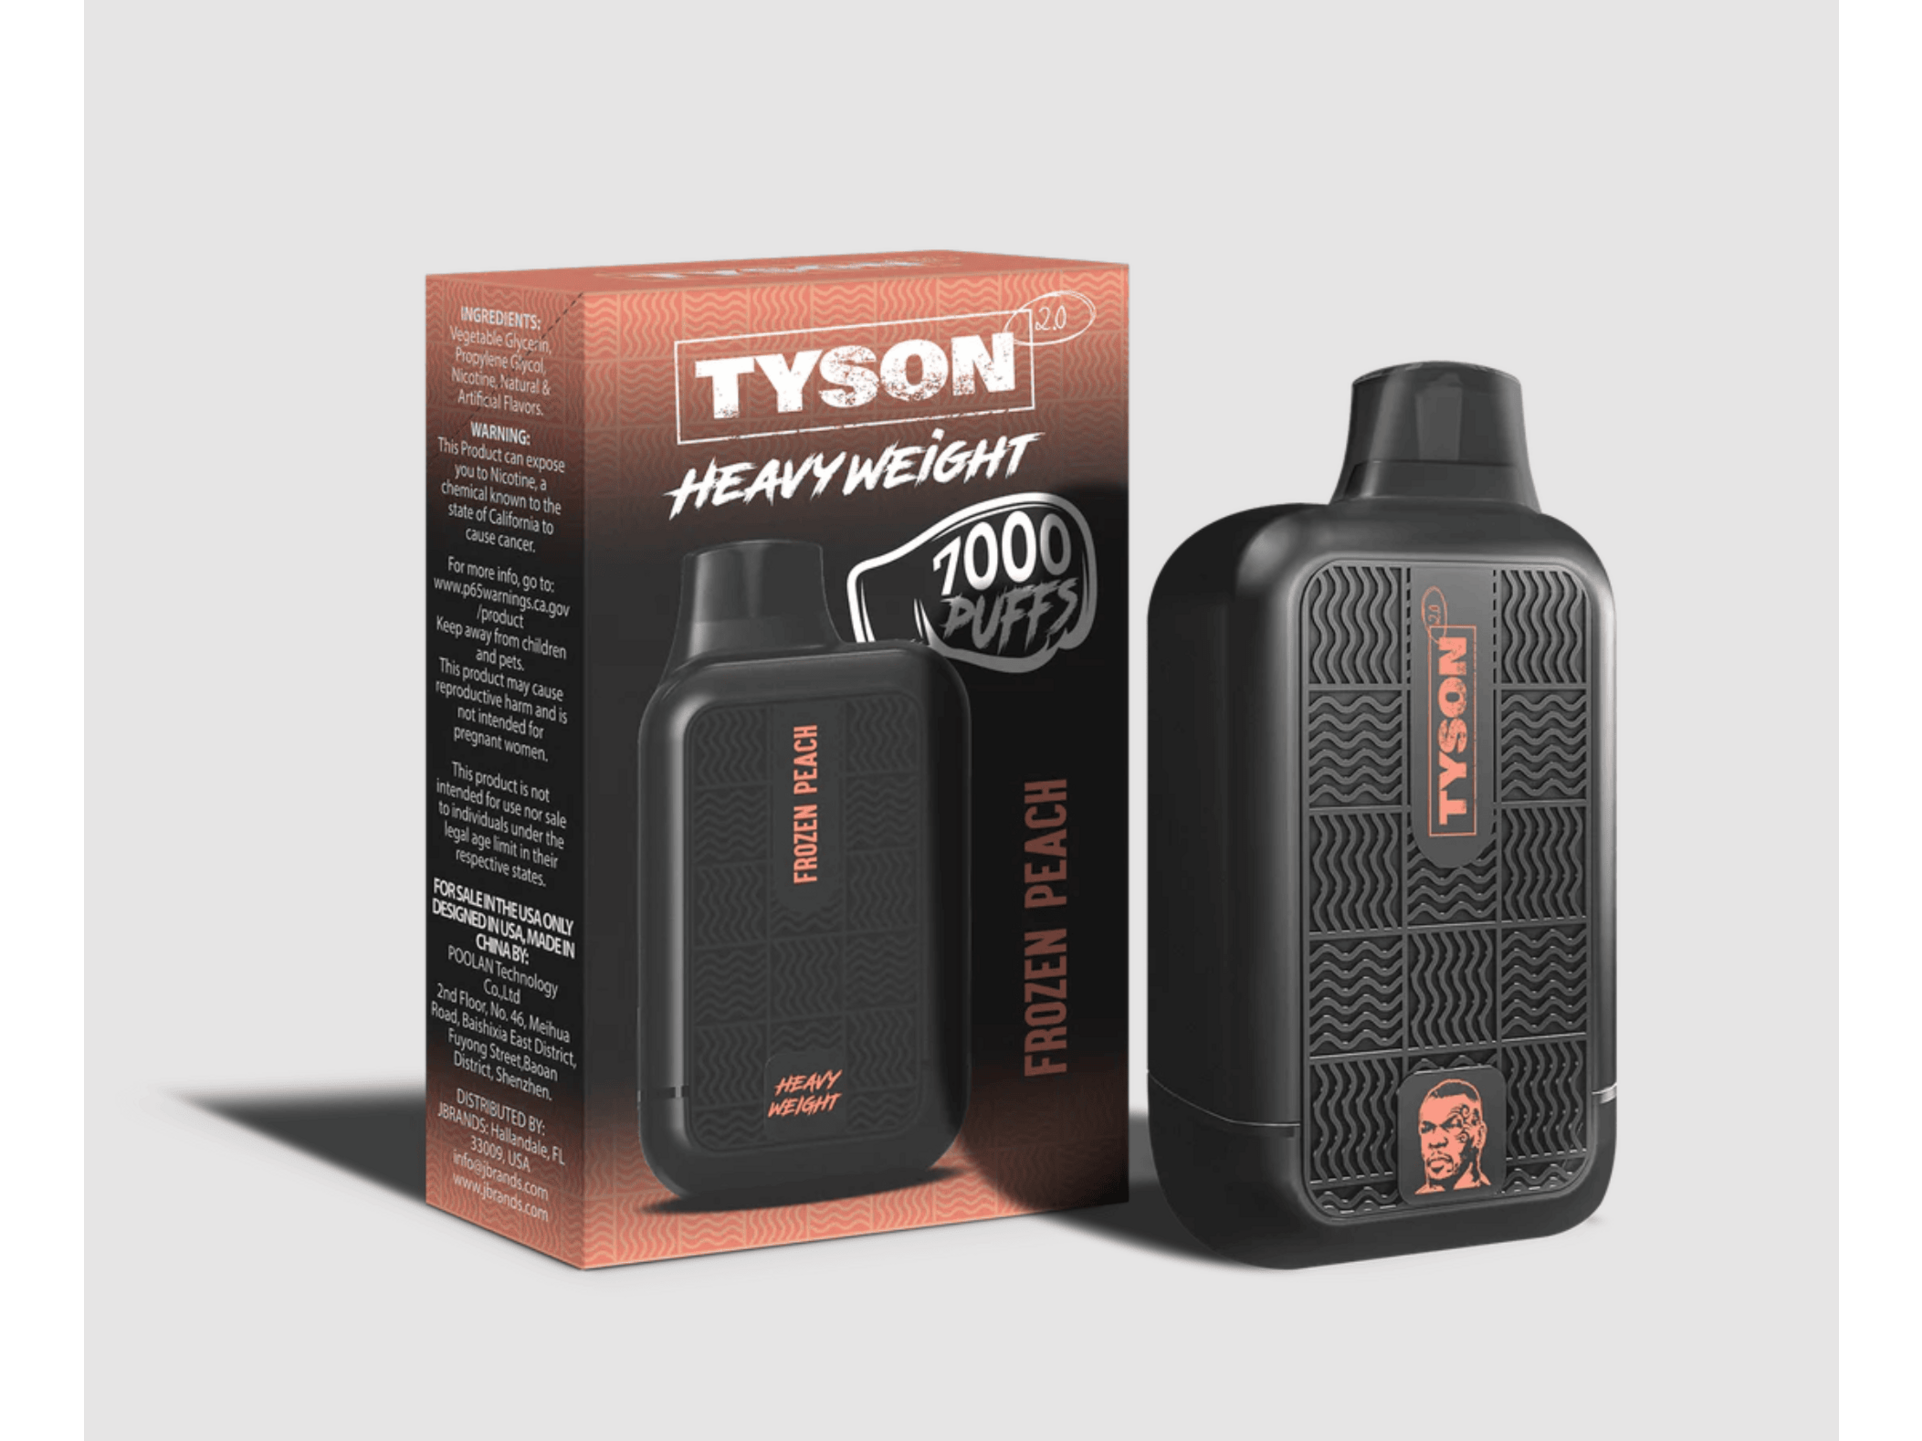 Tyson Heavyweight Frozen Peach flavored disposable vape device and box.